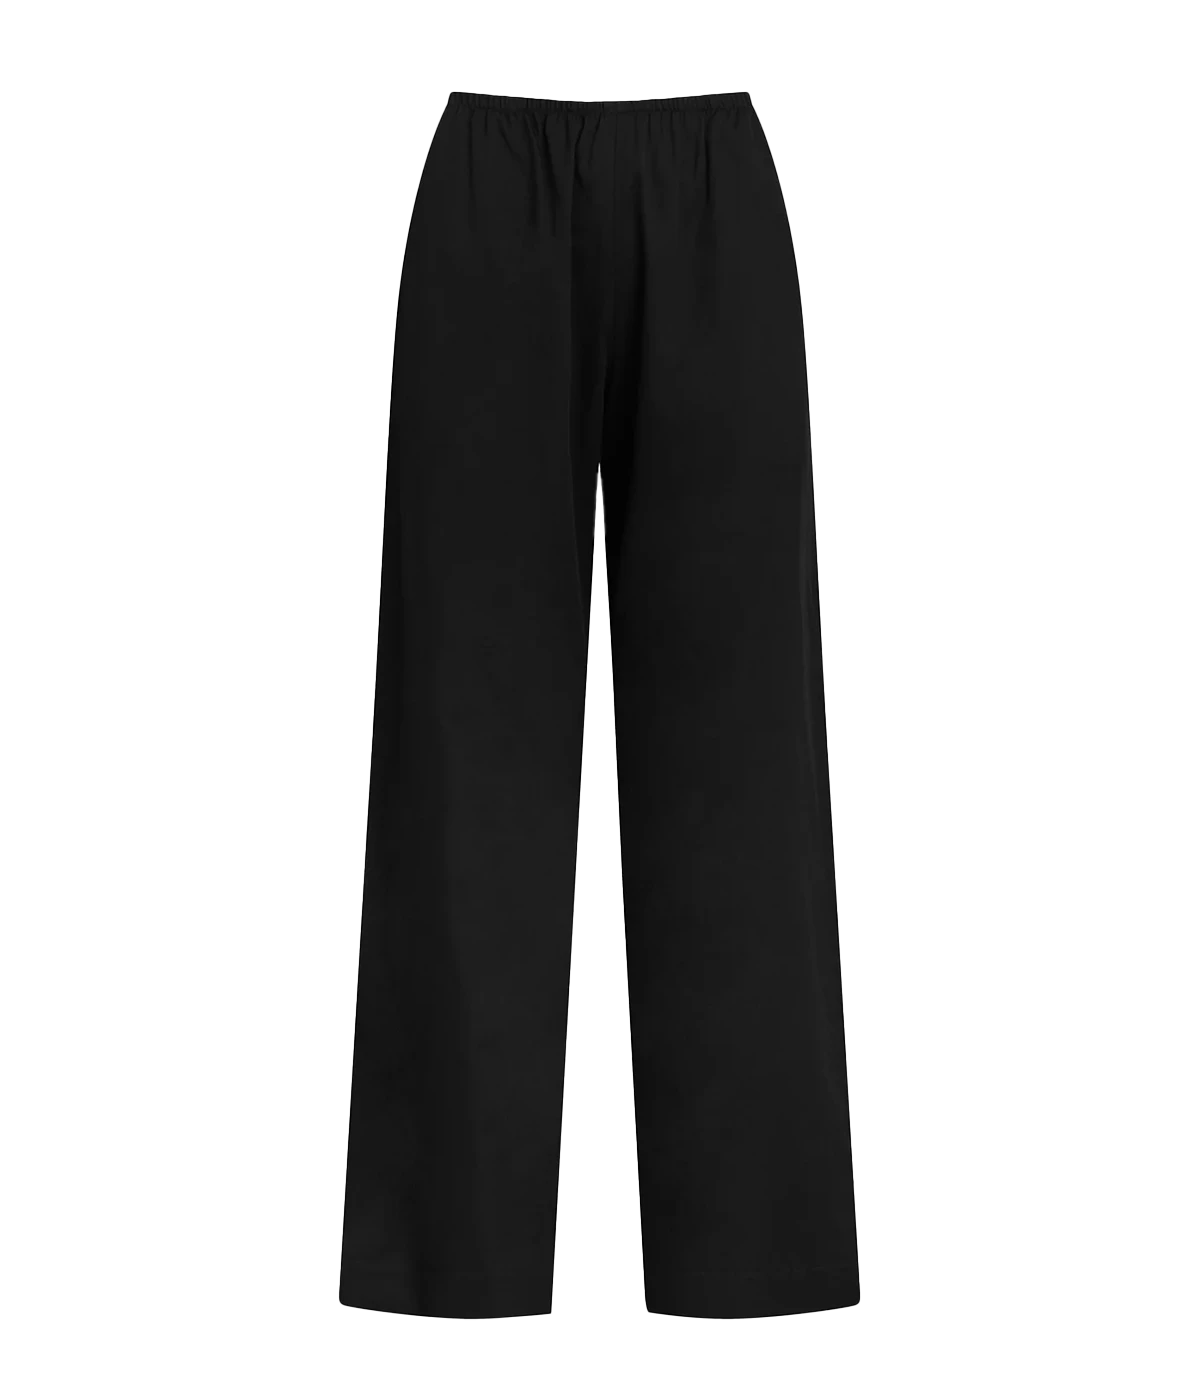 100% crisp cotton lounge pants, effortless and easy with an elasticated waist band, side seem pockets. Comfortable, everyday pant, best selling, made internationally. 